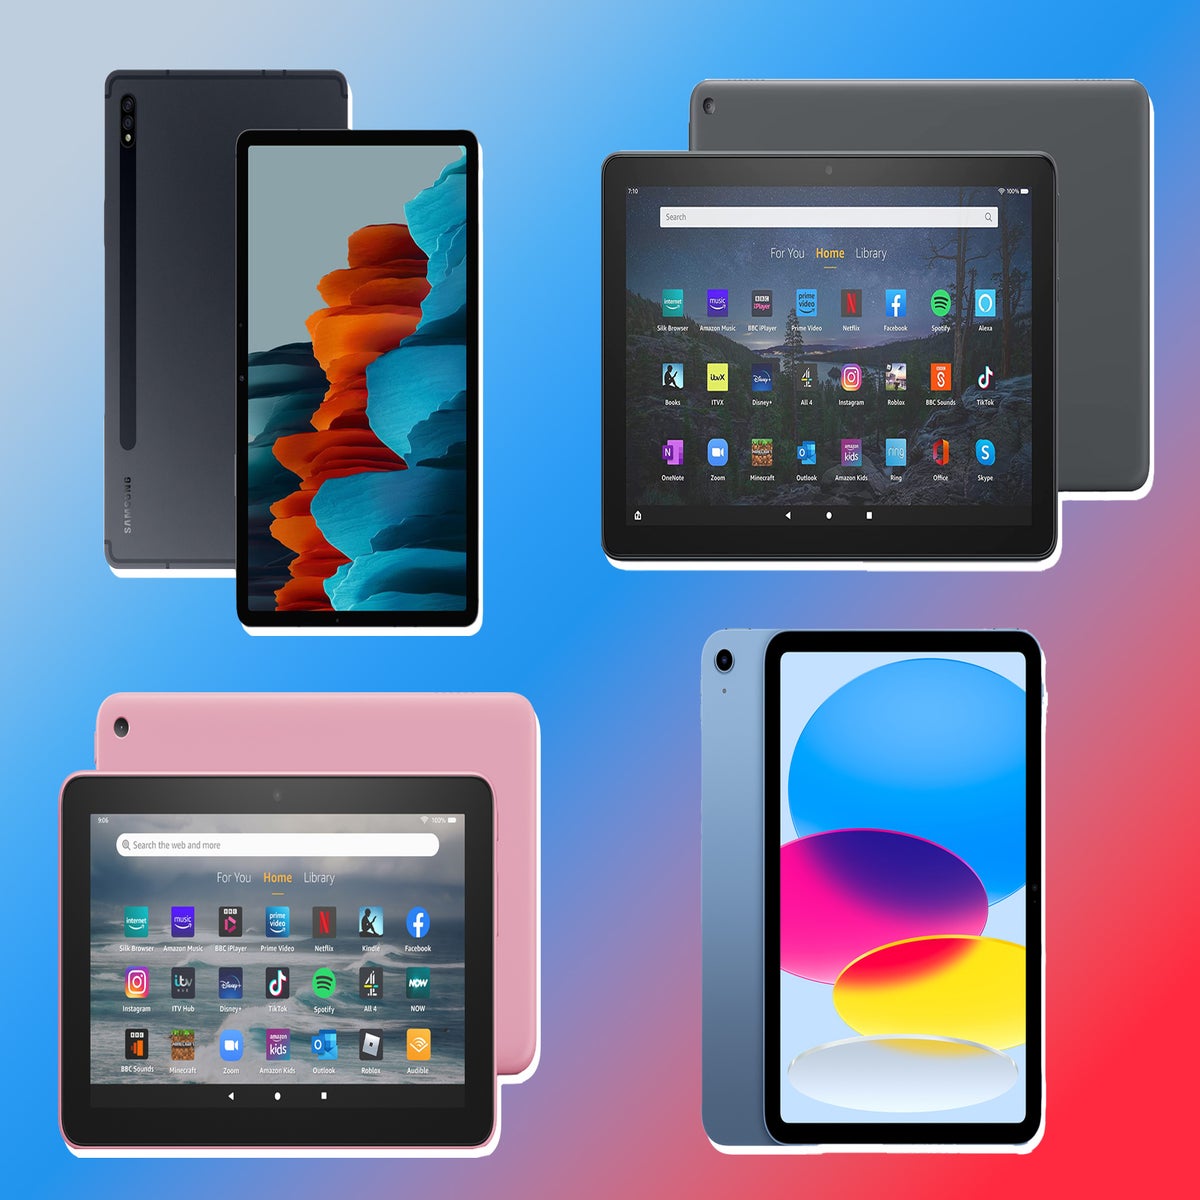 The Best Cheap Tablets for 2024